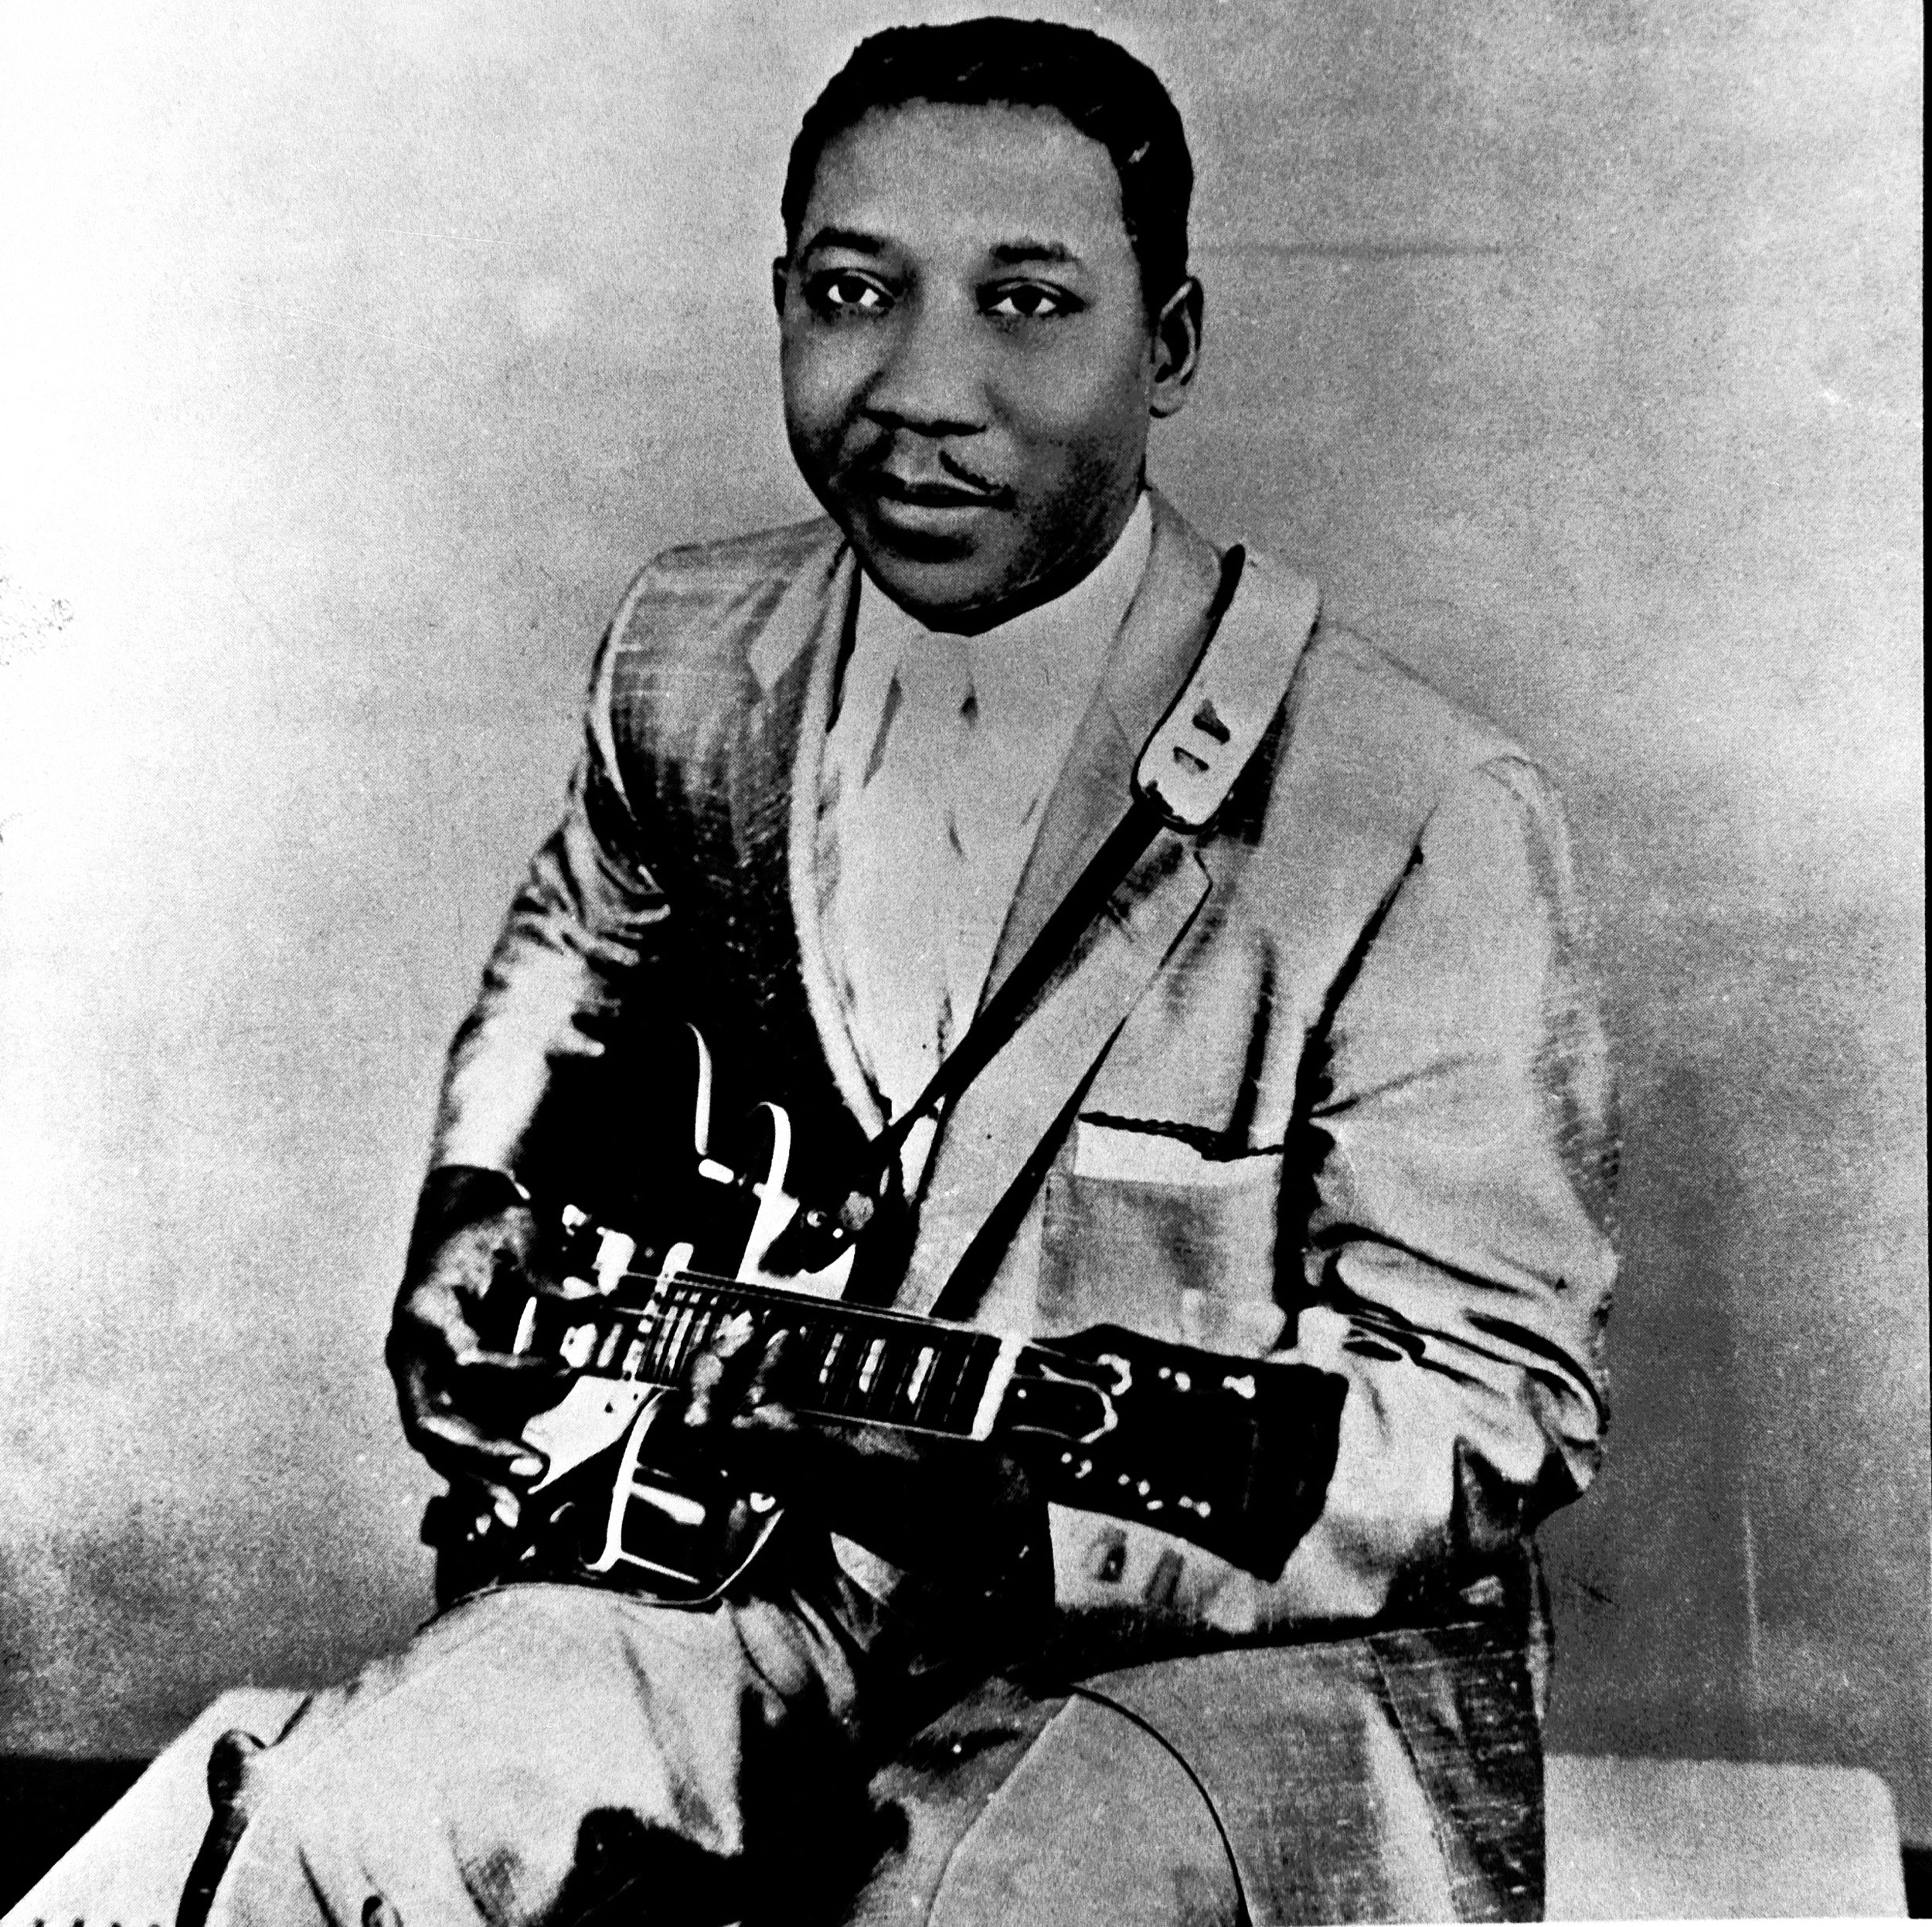 “I Just Want to Make Love to You” - Muddy Waters